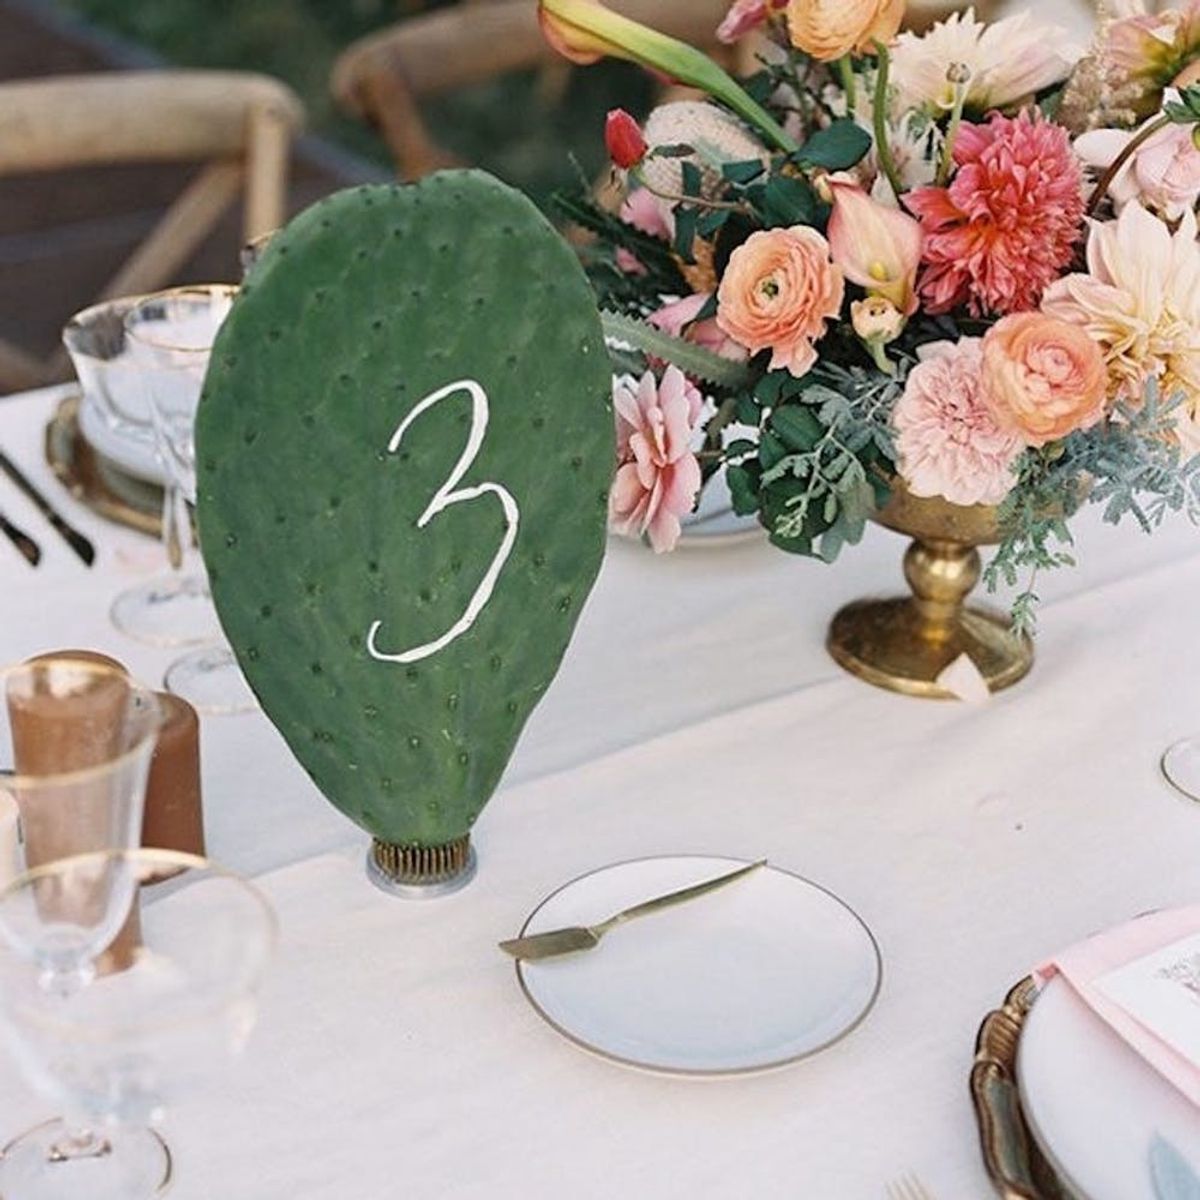 Cactus Wedding Decor Is the 2017 Trend We Can’t Get Enough Of